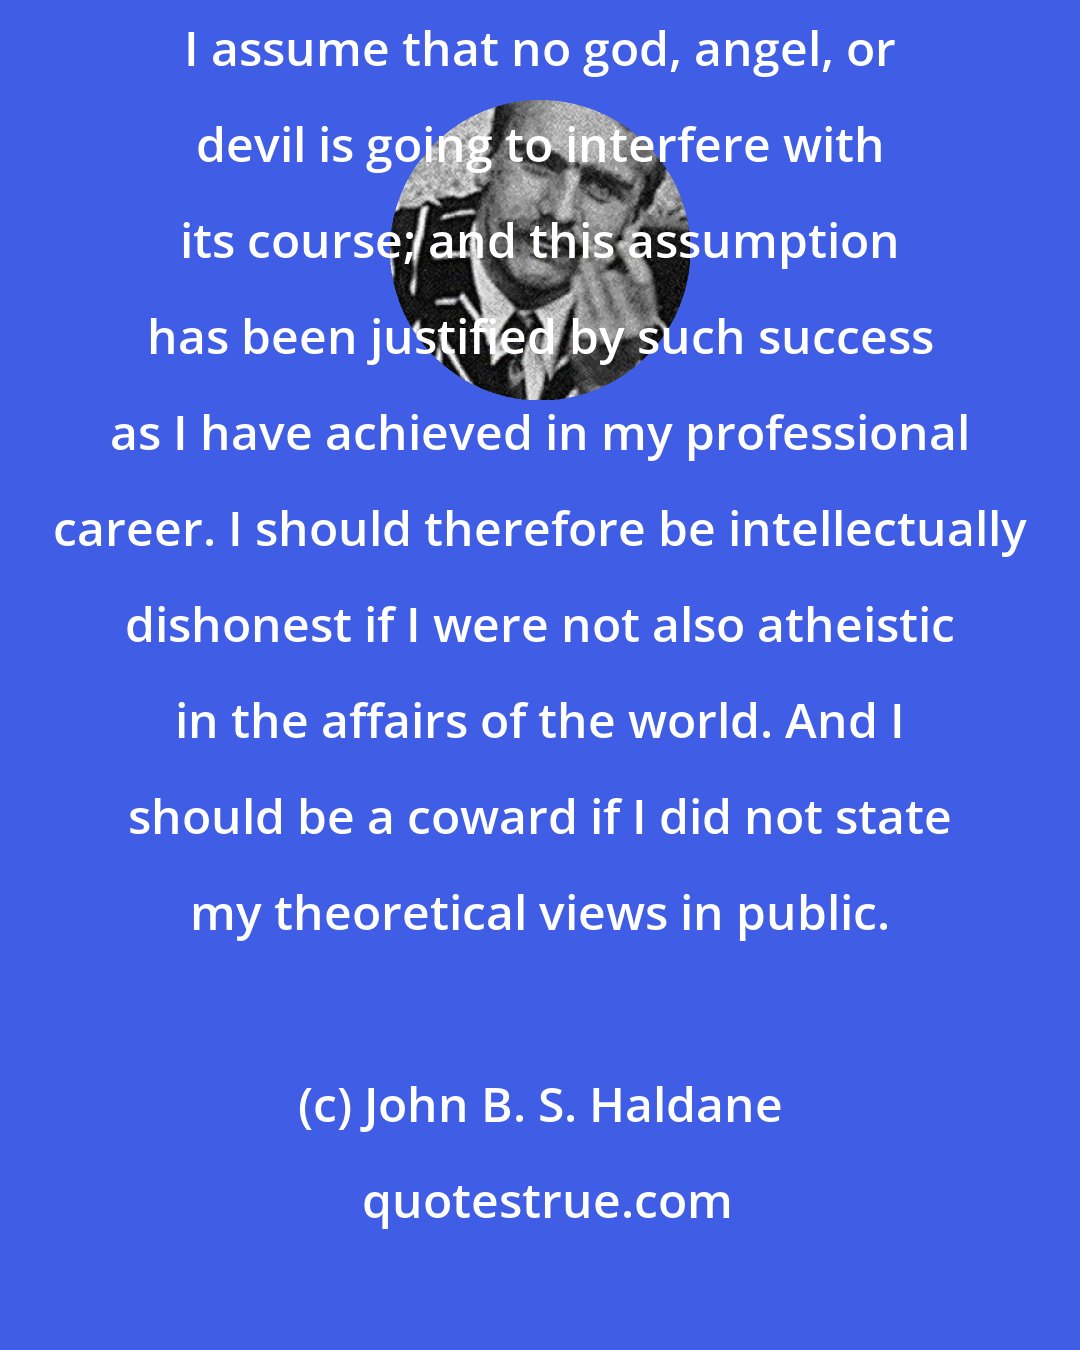 John B. S. Haldane: My practise as a scientist is atheistic. That is to say, when I set up an experiment I assume that no god, angel, or devil is going to interfere with its course; and this assumption has been justified by such success as I have achieved in my professional career. I should therefore be intellectually dishonest if I were not also atheistic in the affairs of the world. And I should be a coward if I did not state my theoretical views in public.